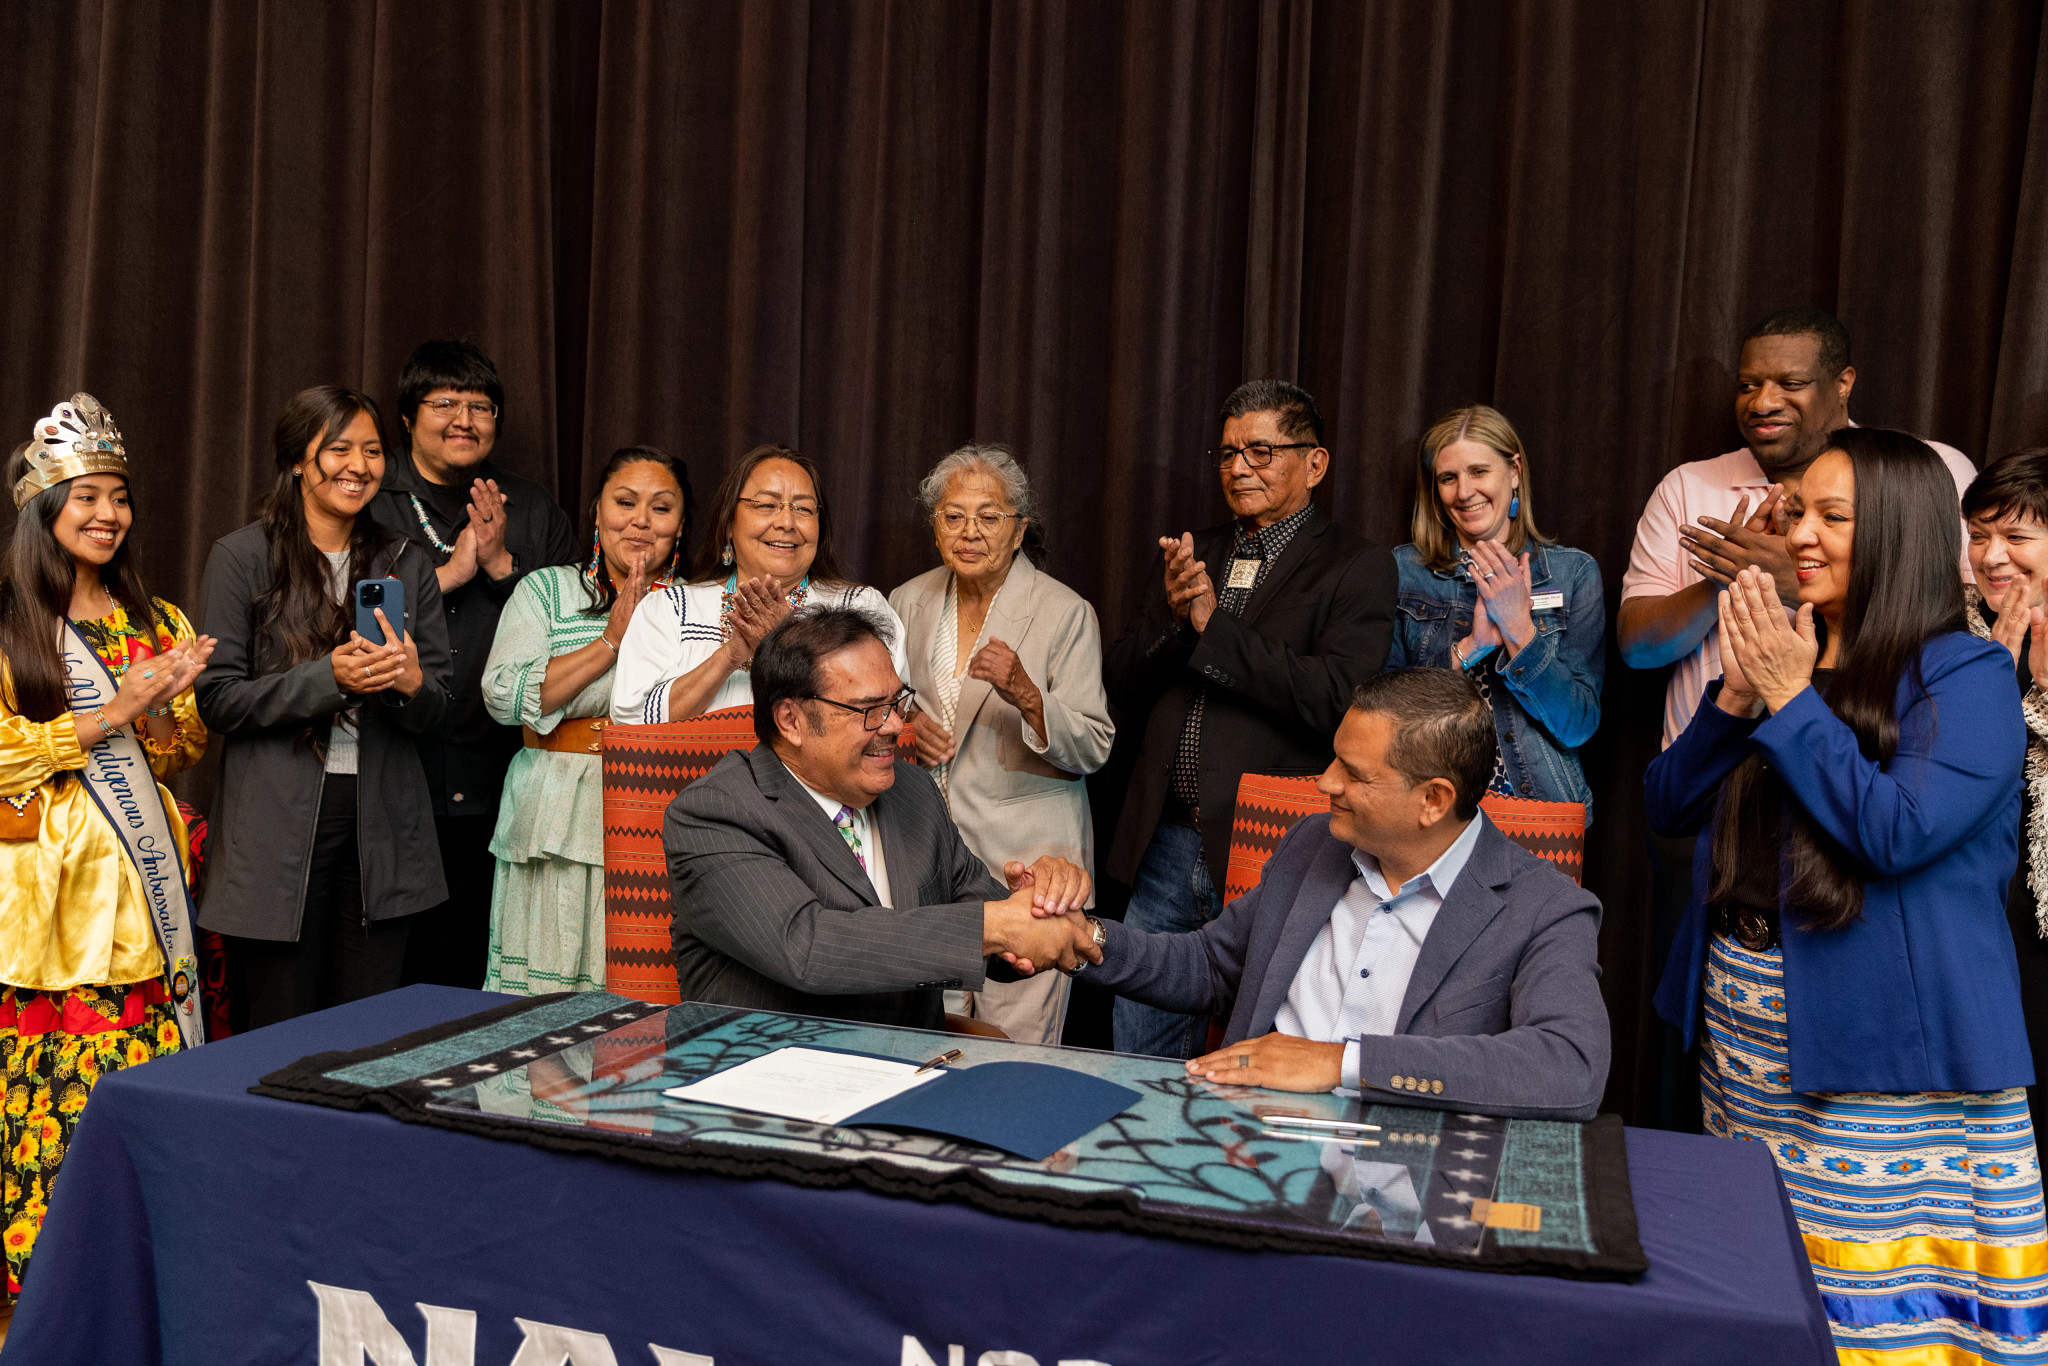 Martin Ahumada and José Luis Cruz Rivera shake hands while sitting at a table, while people in the background clap.